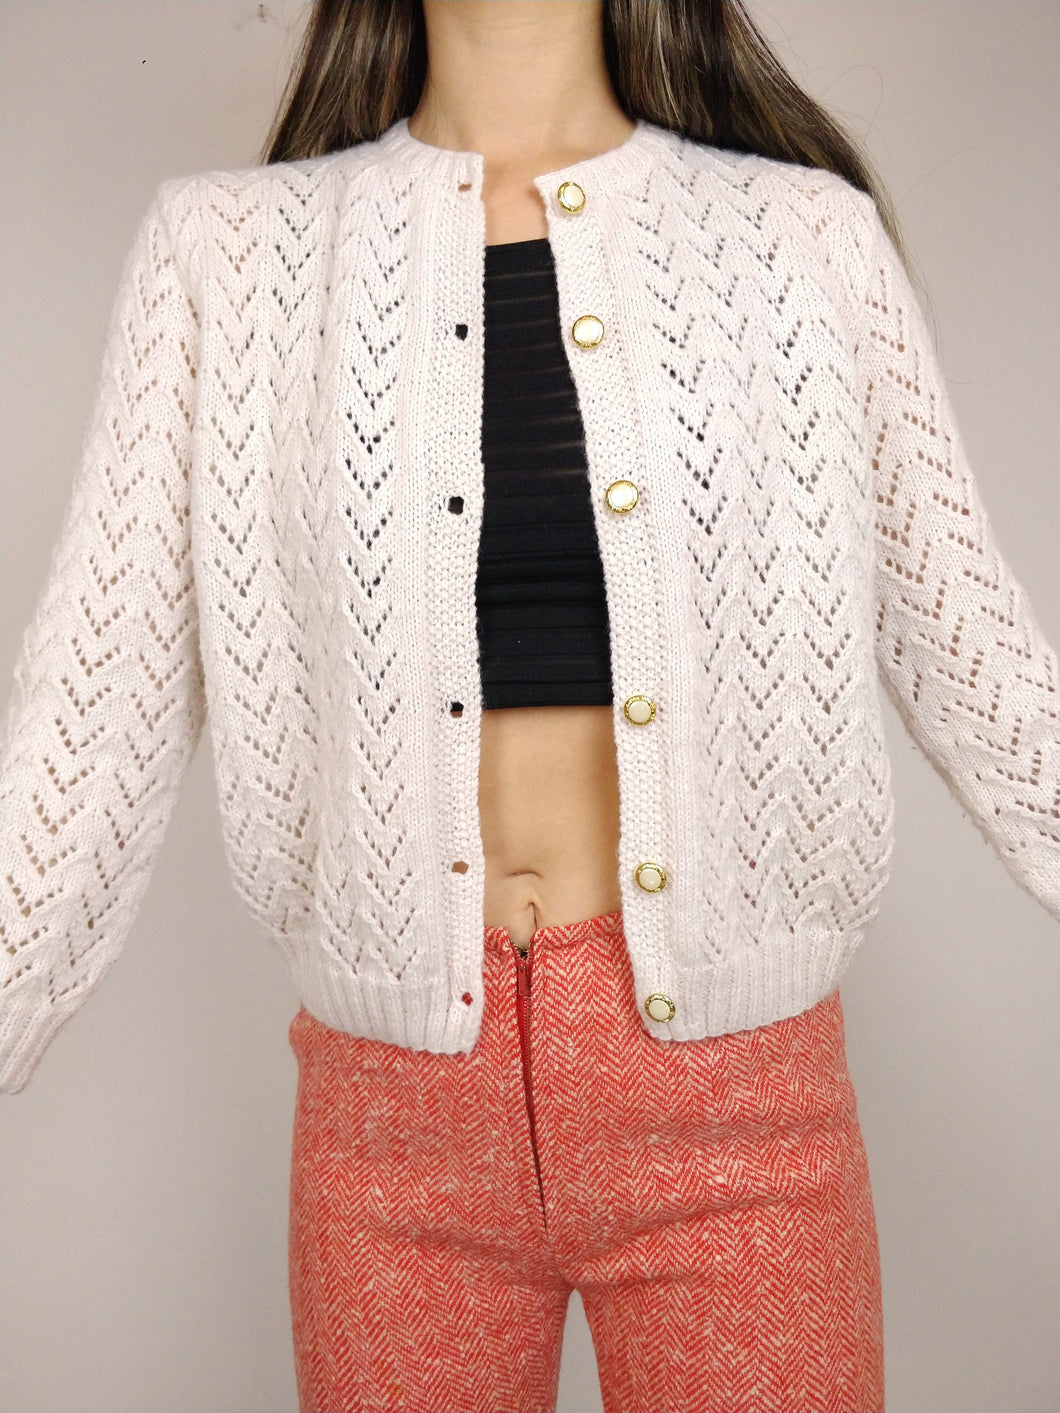 The Marshmallow Knit | Vintage white pink knit sweater cardigan top plain XS-S